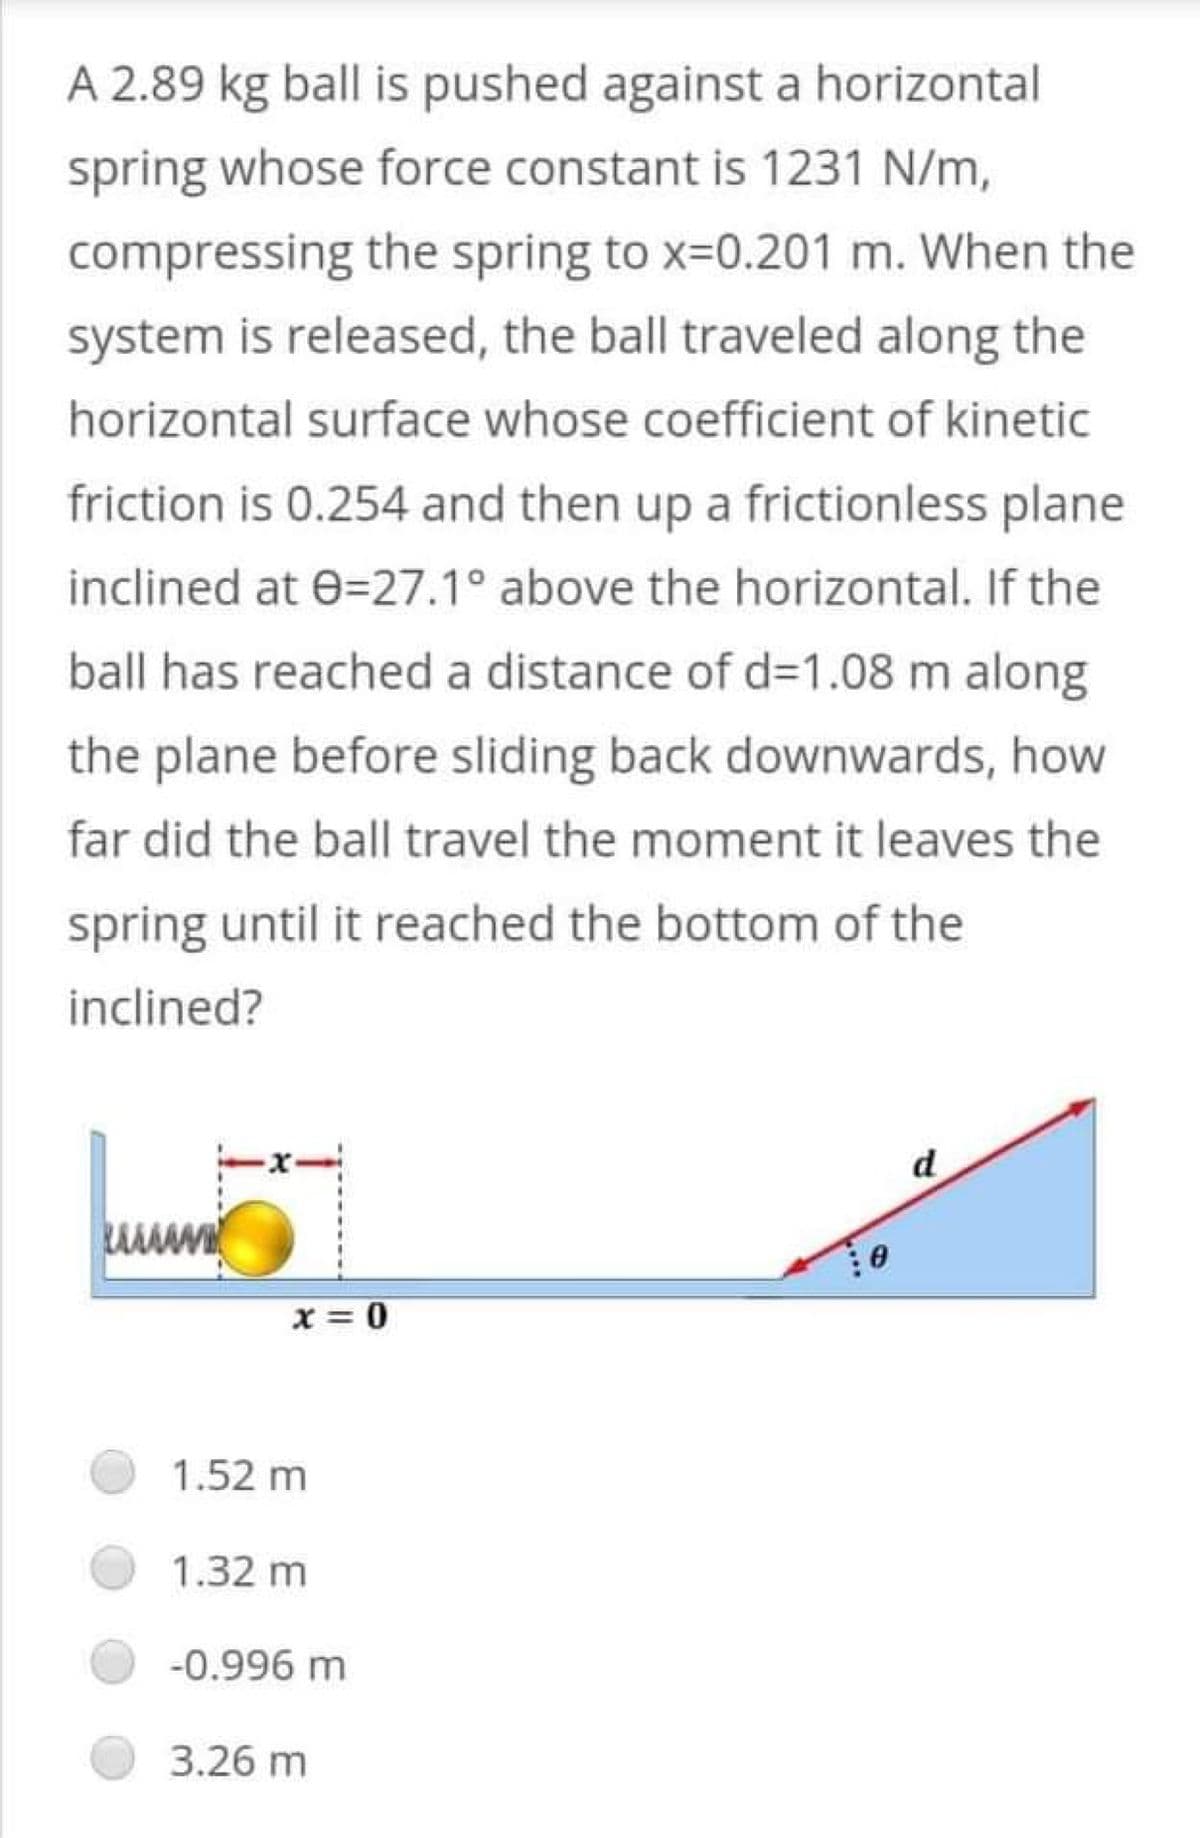 A 2.89 kg ball is pushed against a horizontal
spring whose force constant is 1231 N/m,
compressing the spring to x=0.201 m. When the
system is released, the ball traveled along the
horizontal surface whose coefficient of kinetic
friction is 0.254 and then up a frictionless plane
inclined at 0=27.1° above the horizontal. If the
ball has reached a distance of d=1.08 m along
the plane before sliding back downwards, how
far did the ball travel the moment it leaves the
spring until it reached the bottom of the
inclined?
d
www.
x = 0
1.52 m
1.32 m
-0.996 m
3.26 m
0